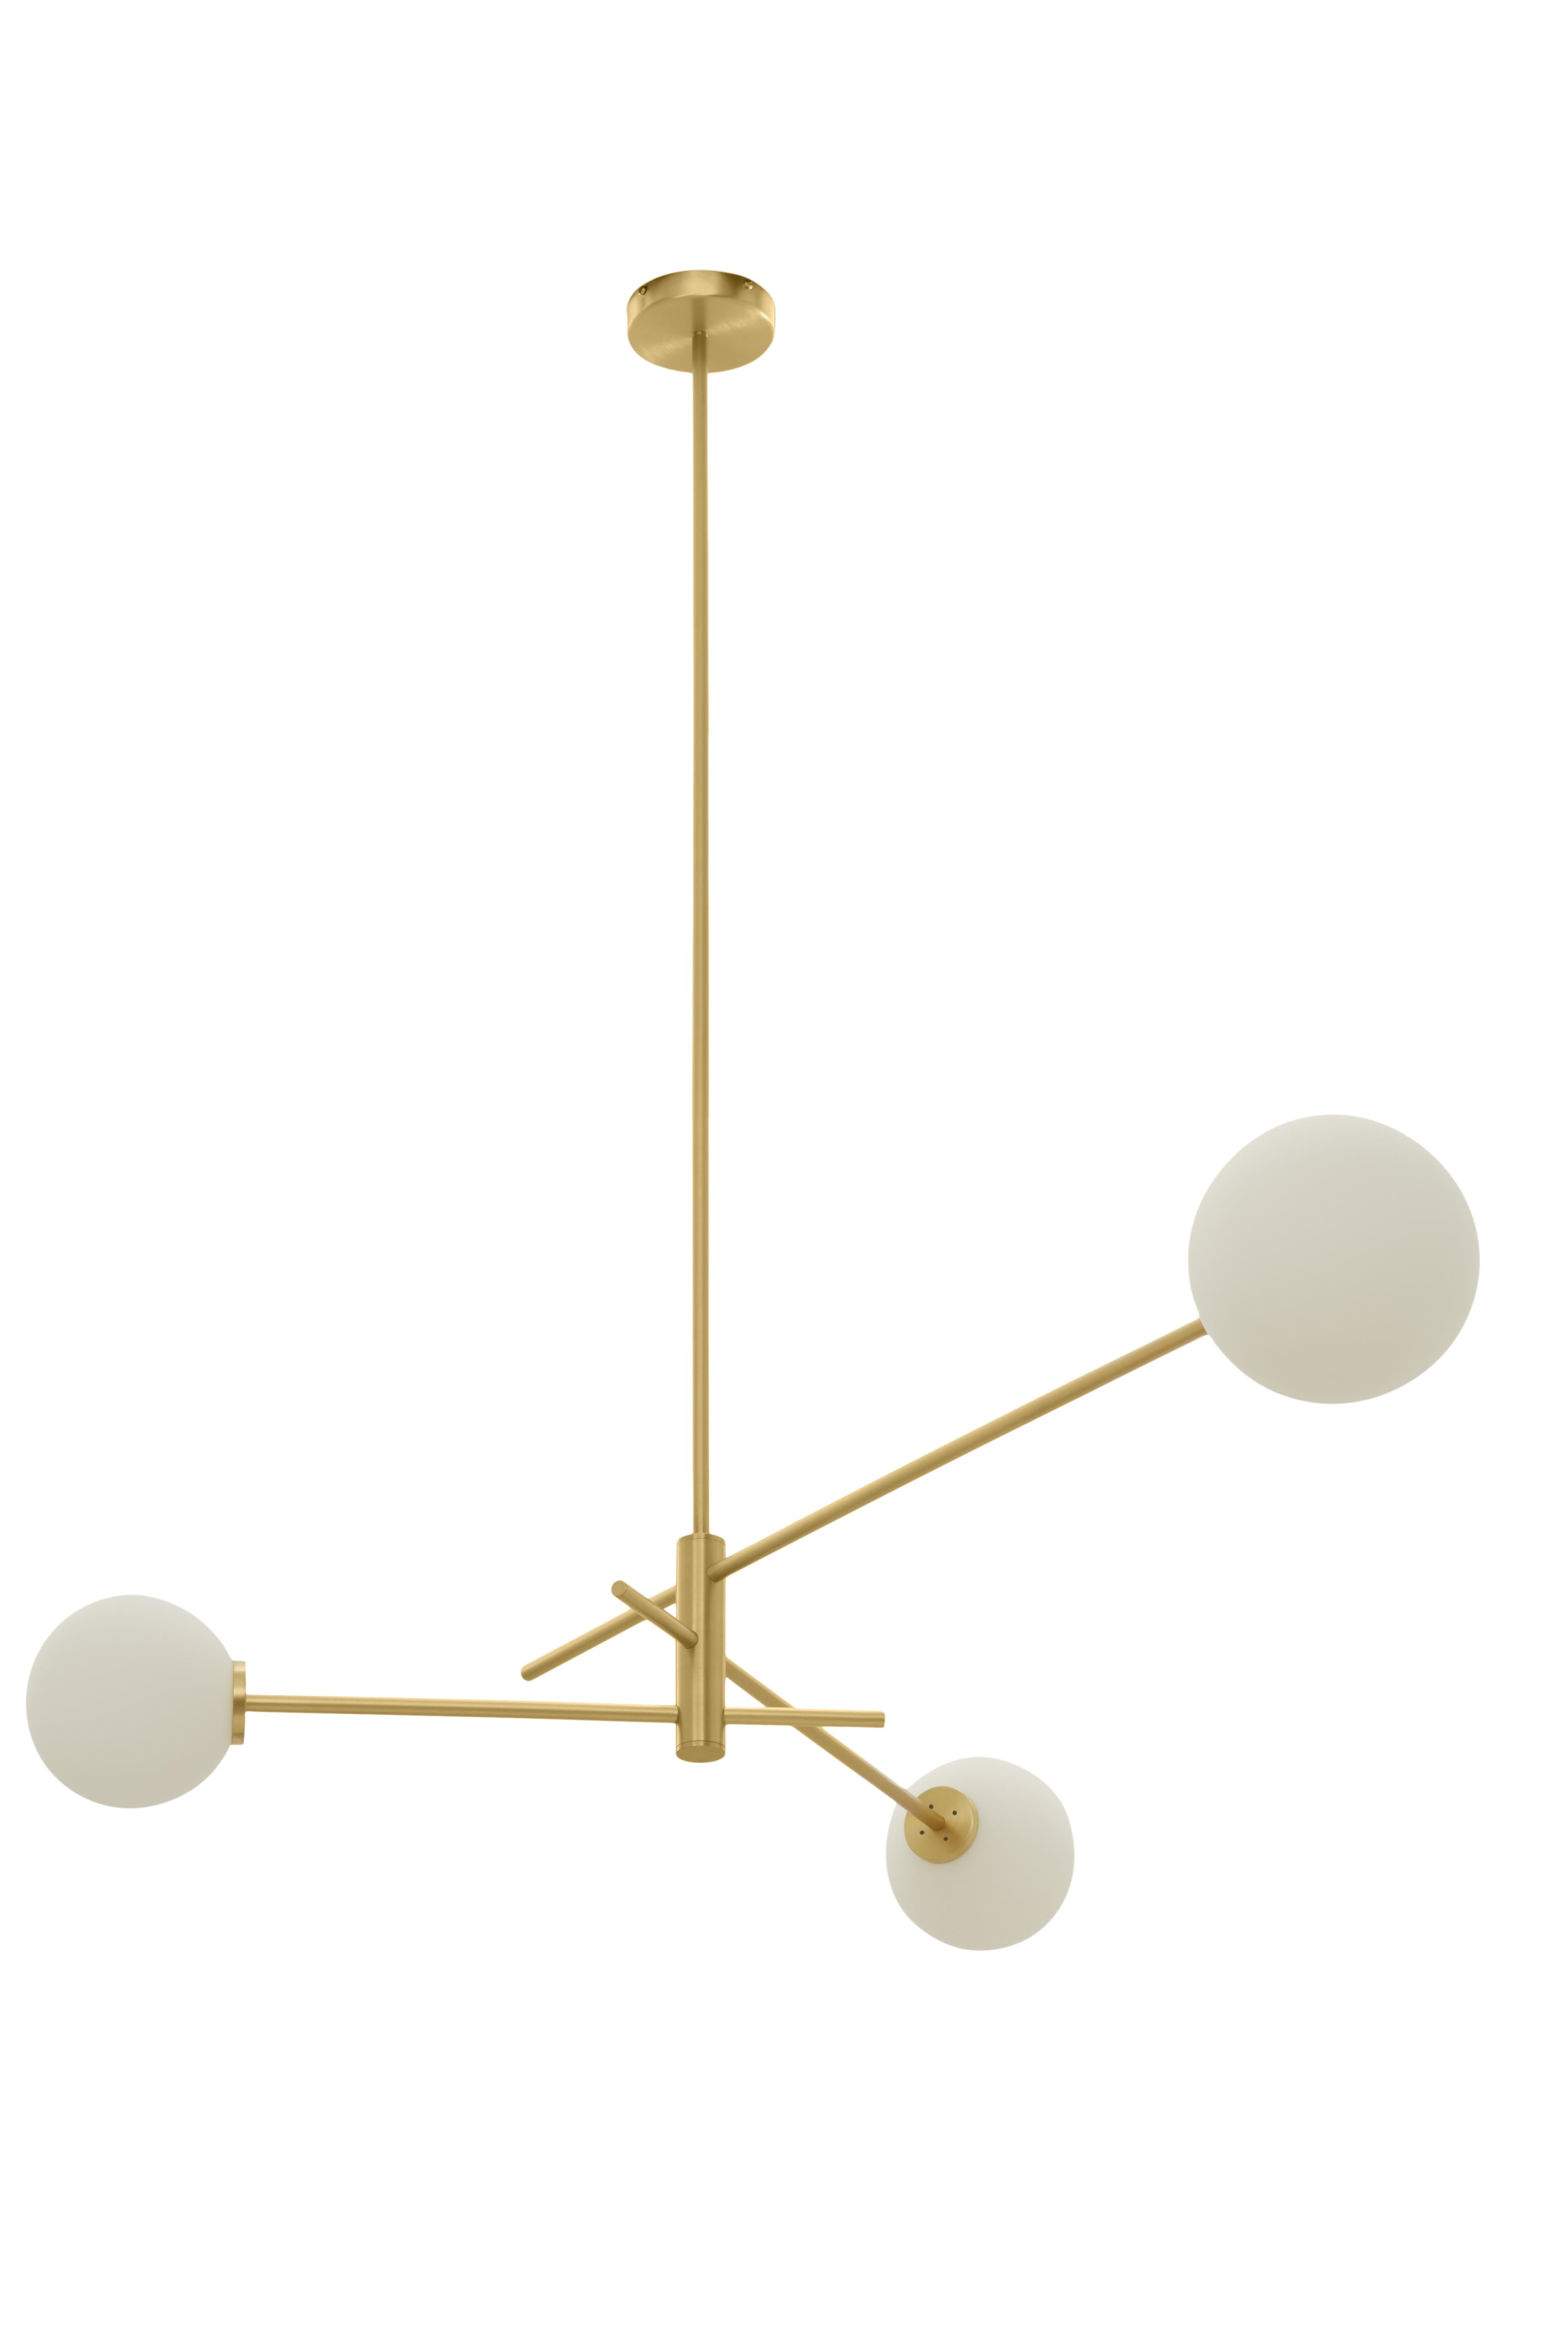 Trevi three pendant by CTO Lighting
Materials: satin brass with matt opal glass shades
Also available in dark bronze with matt opal glass shades

Dimensions: H 25 x W 110 cm 

All our lamps can be wired according to each country. If sold to